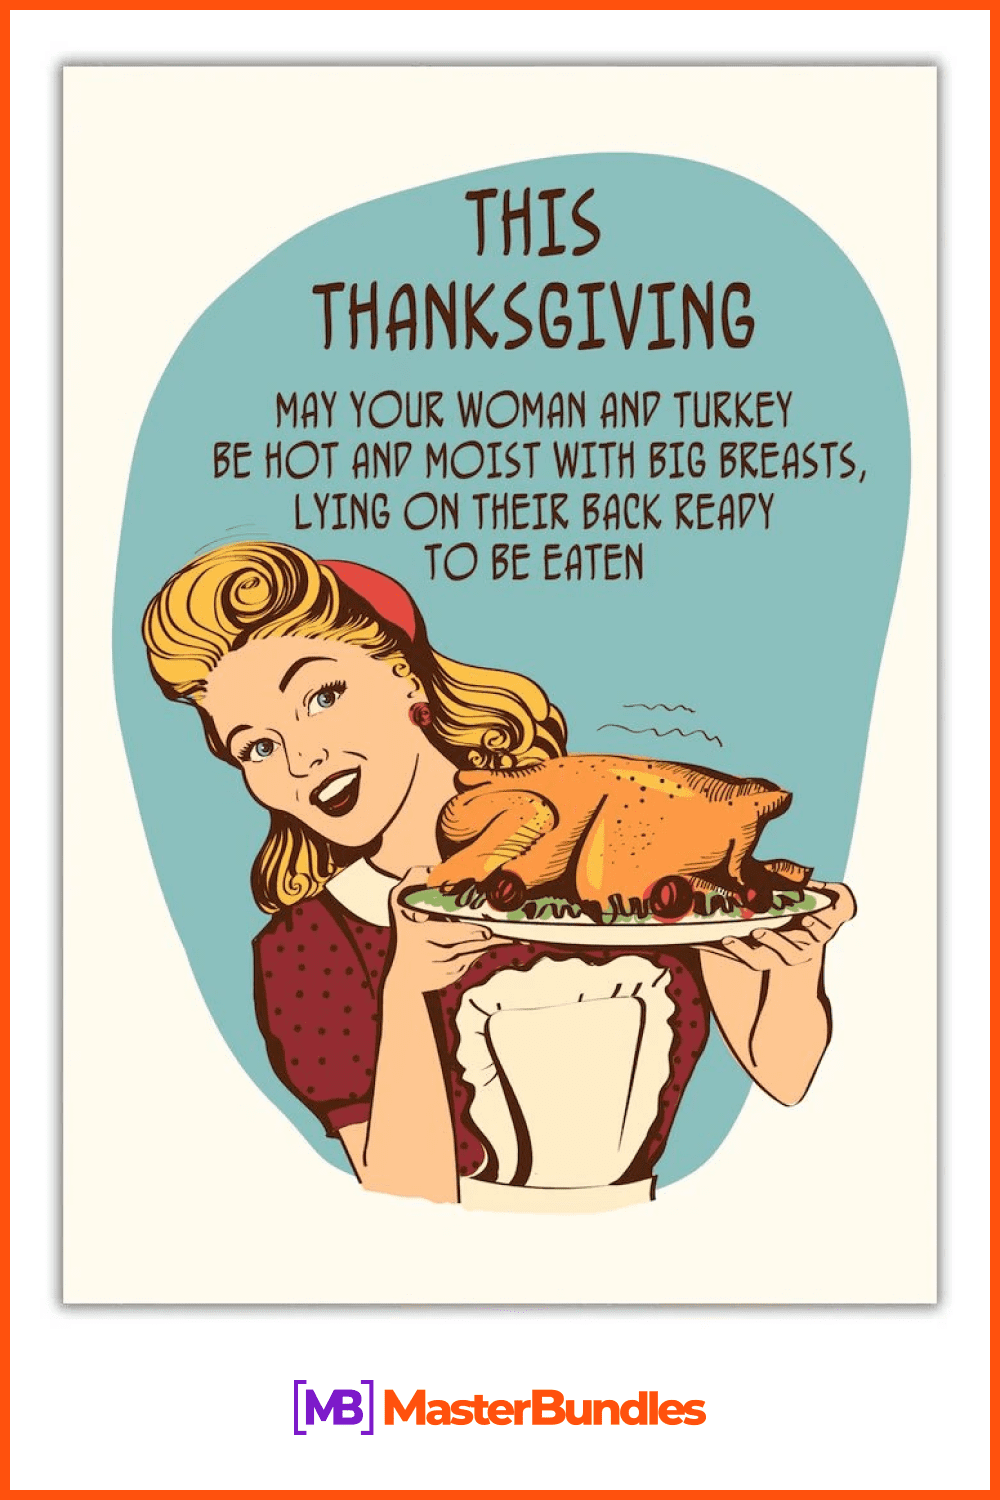 This thanksgiving rude thanksgiving card.